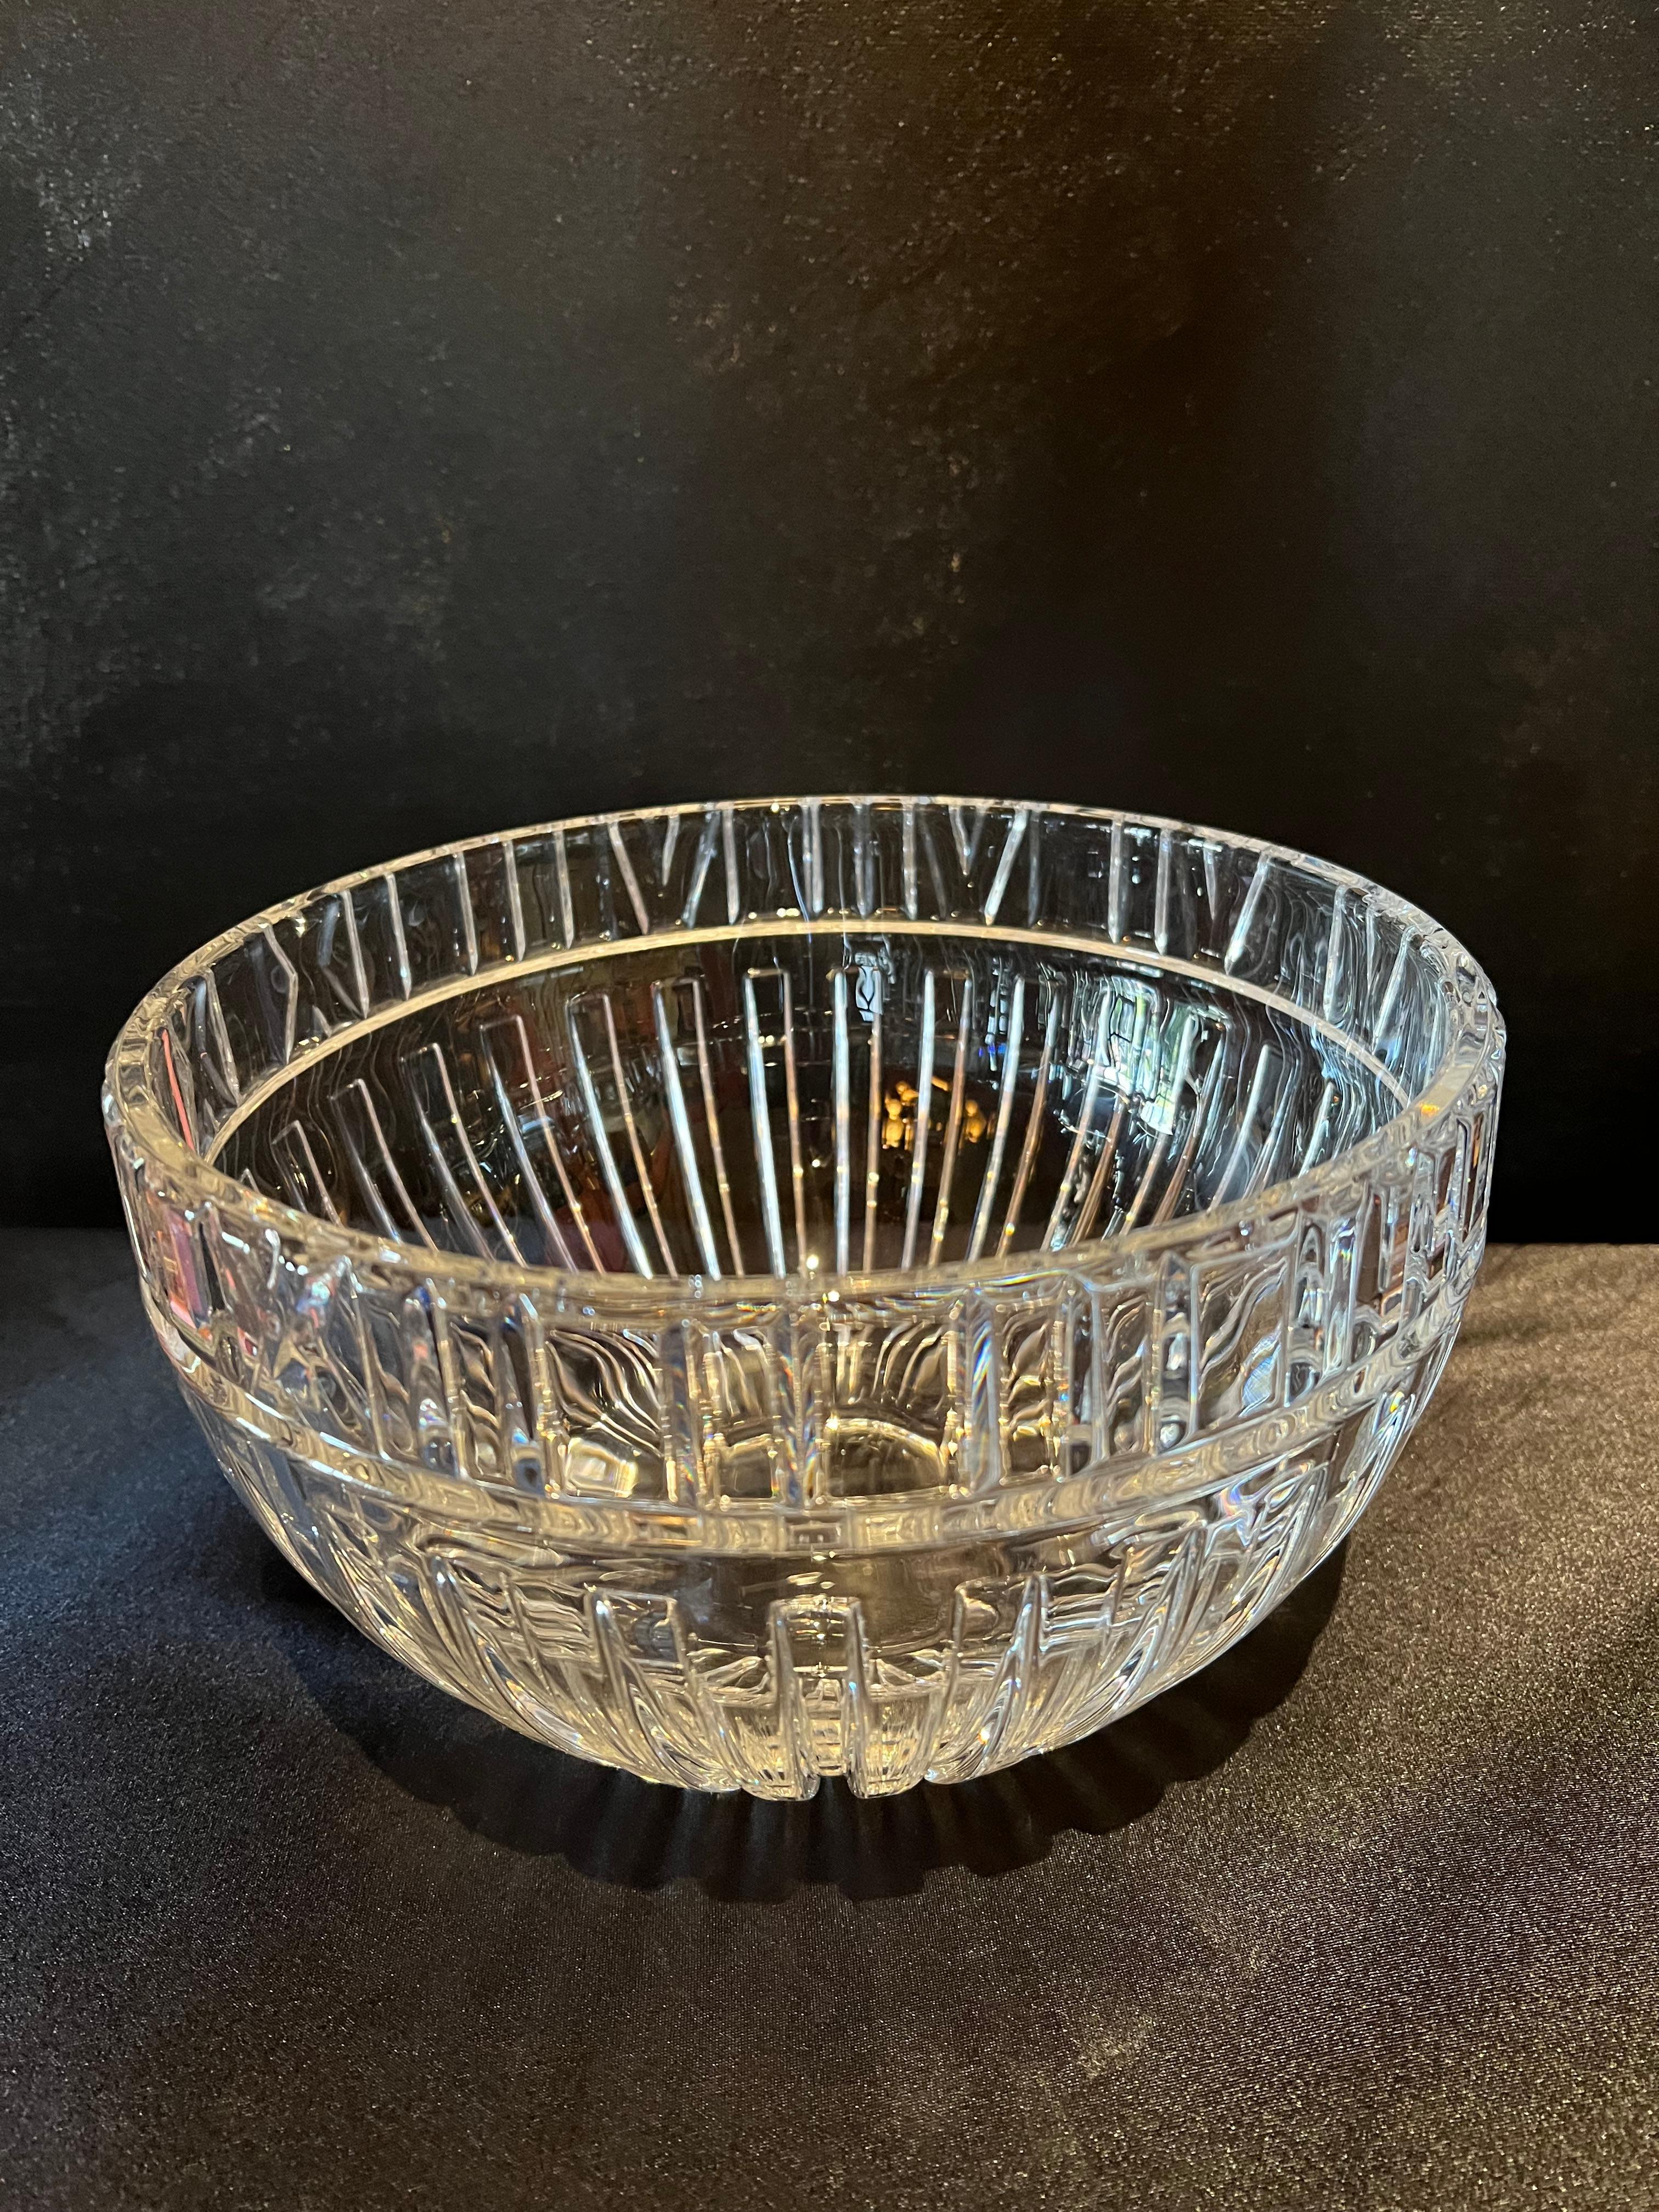 A wonderful decorative and functional Tiffany crystal bowl. Designed and released in the 1980's, this bowl has the classic roman numeral banding familiar with many of the jewelry pieces Tiffany is famous for. 

The bowl can work in any setting and